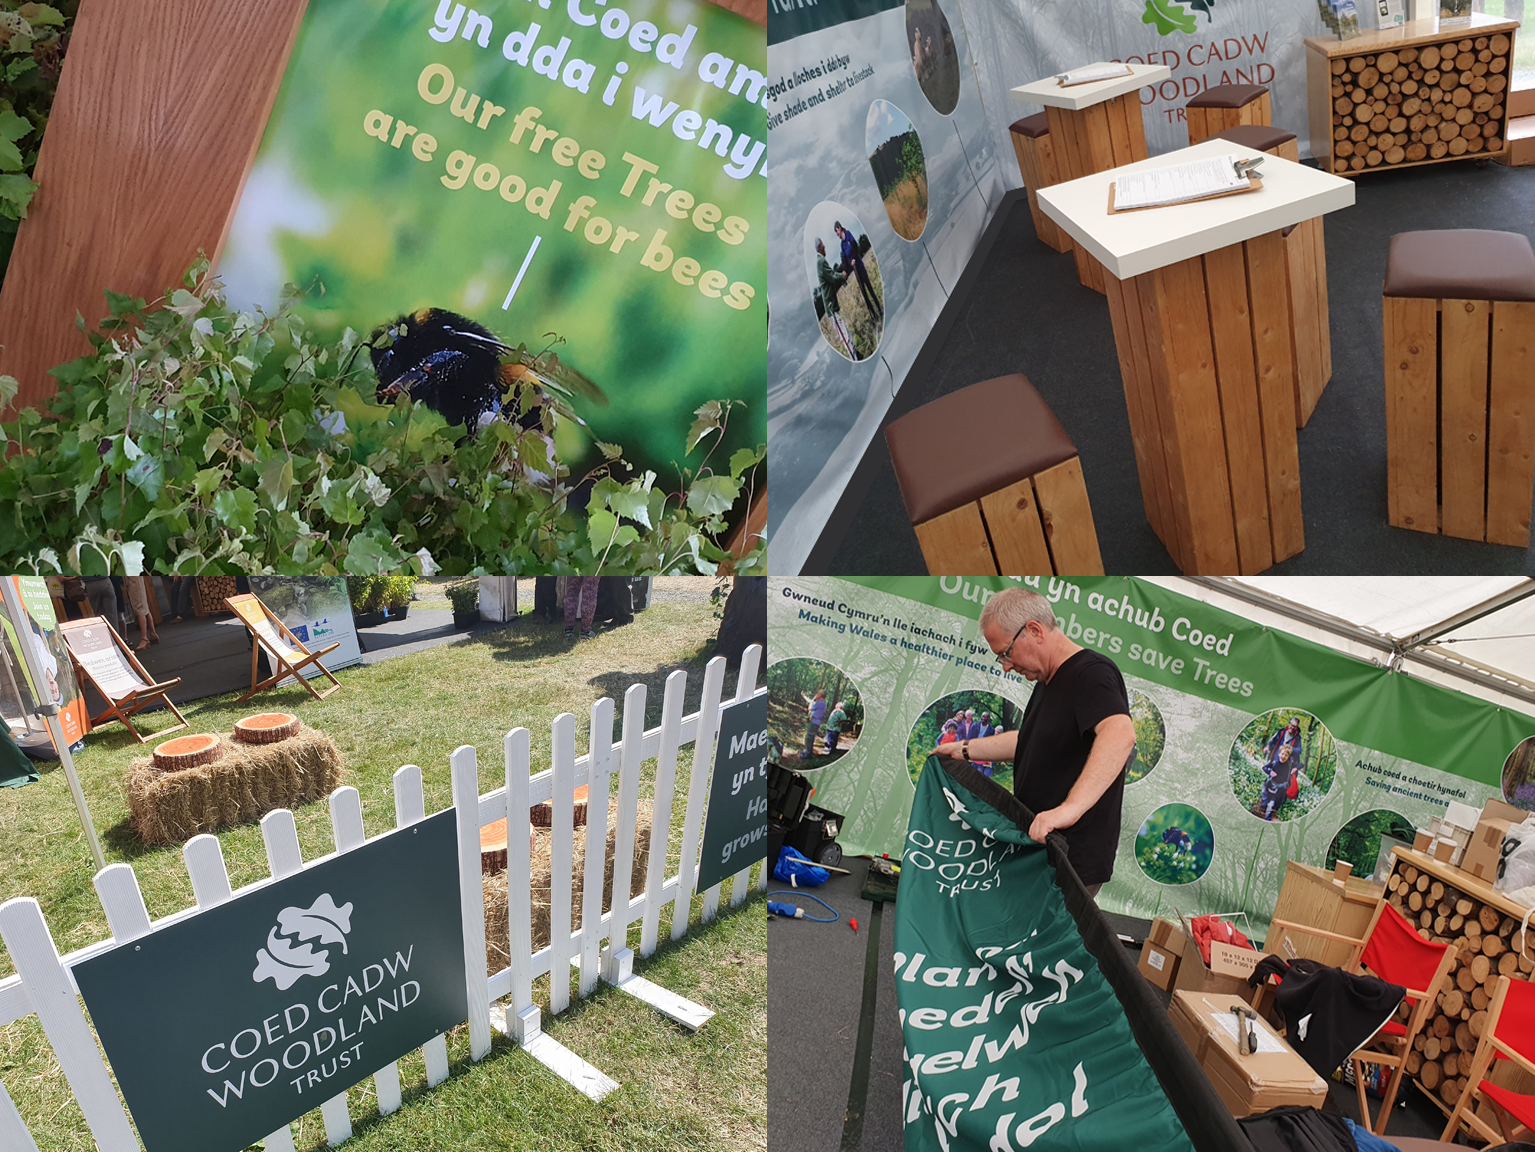 Woodland Trust at the Royal Welsh Show